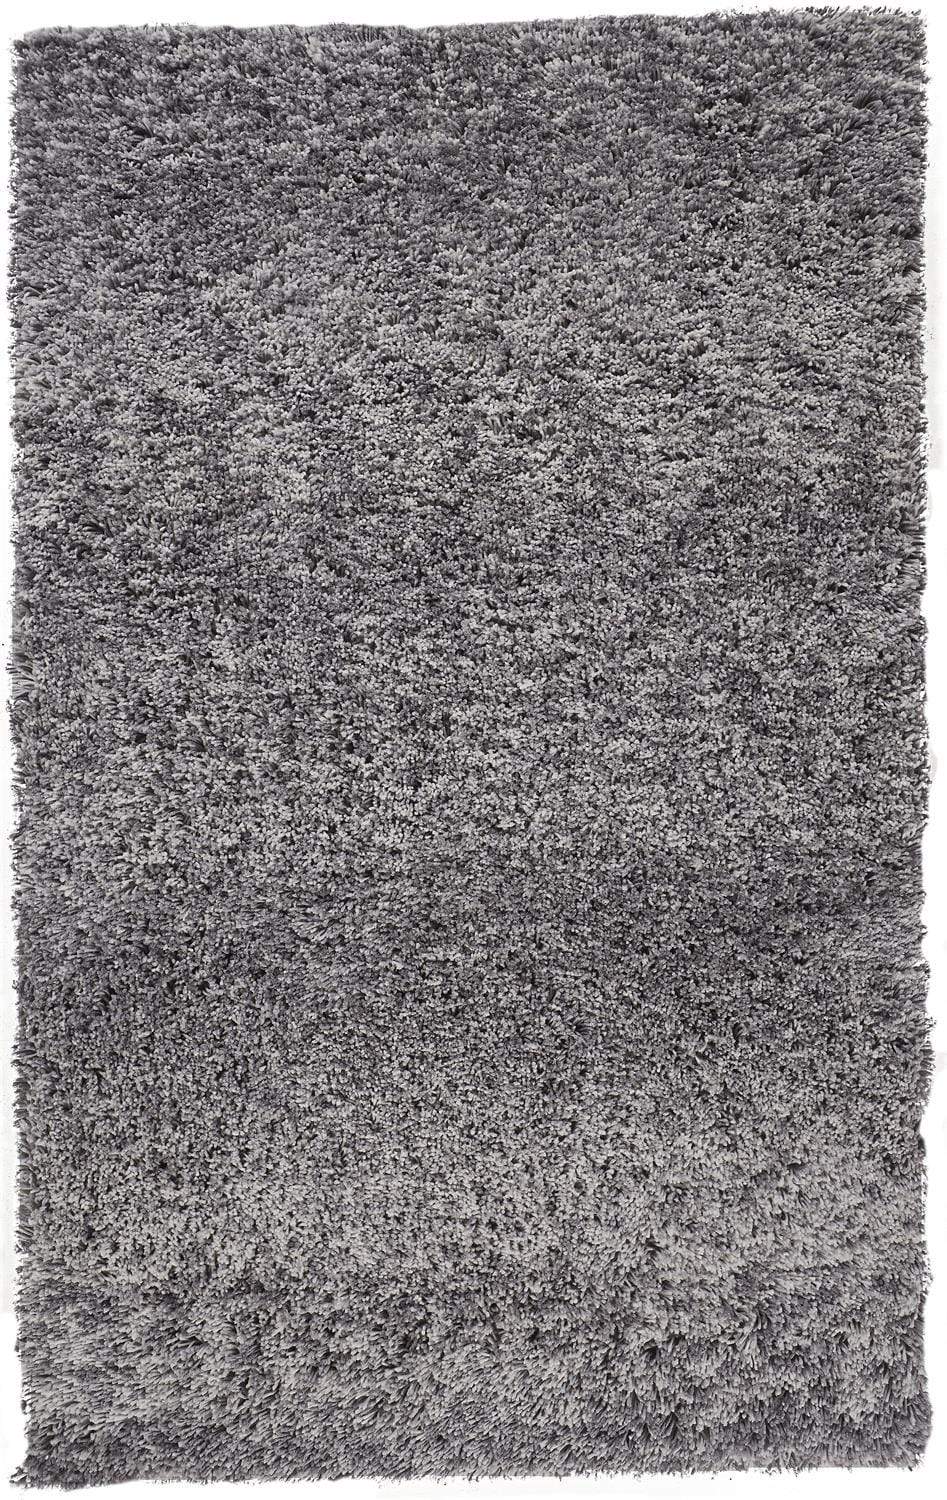 Feizy Feizy Stoneleigh Stonewashed Mélange Shag Area Rug - Steel Gray 4' x 6' 3998830FGRY000C00